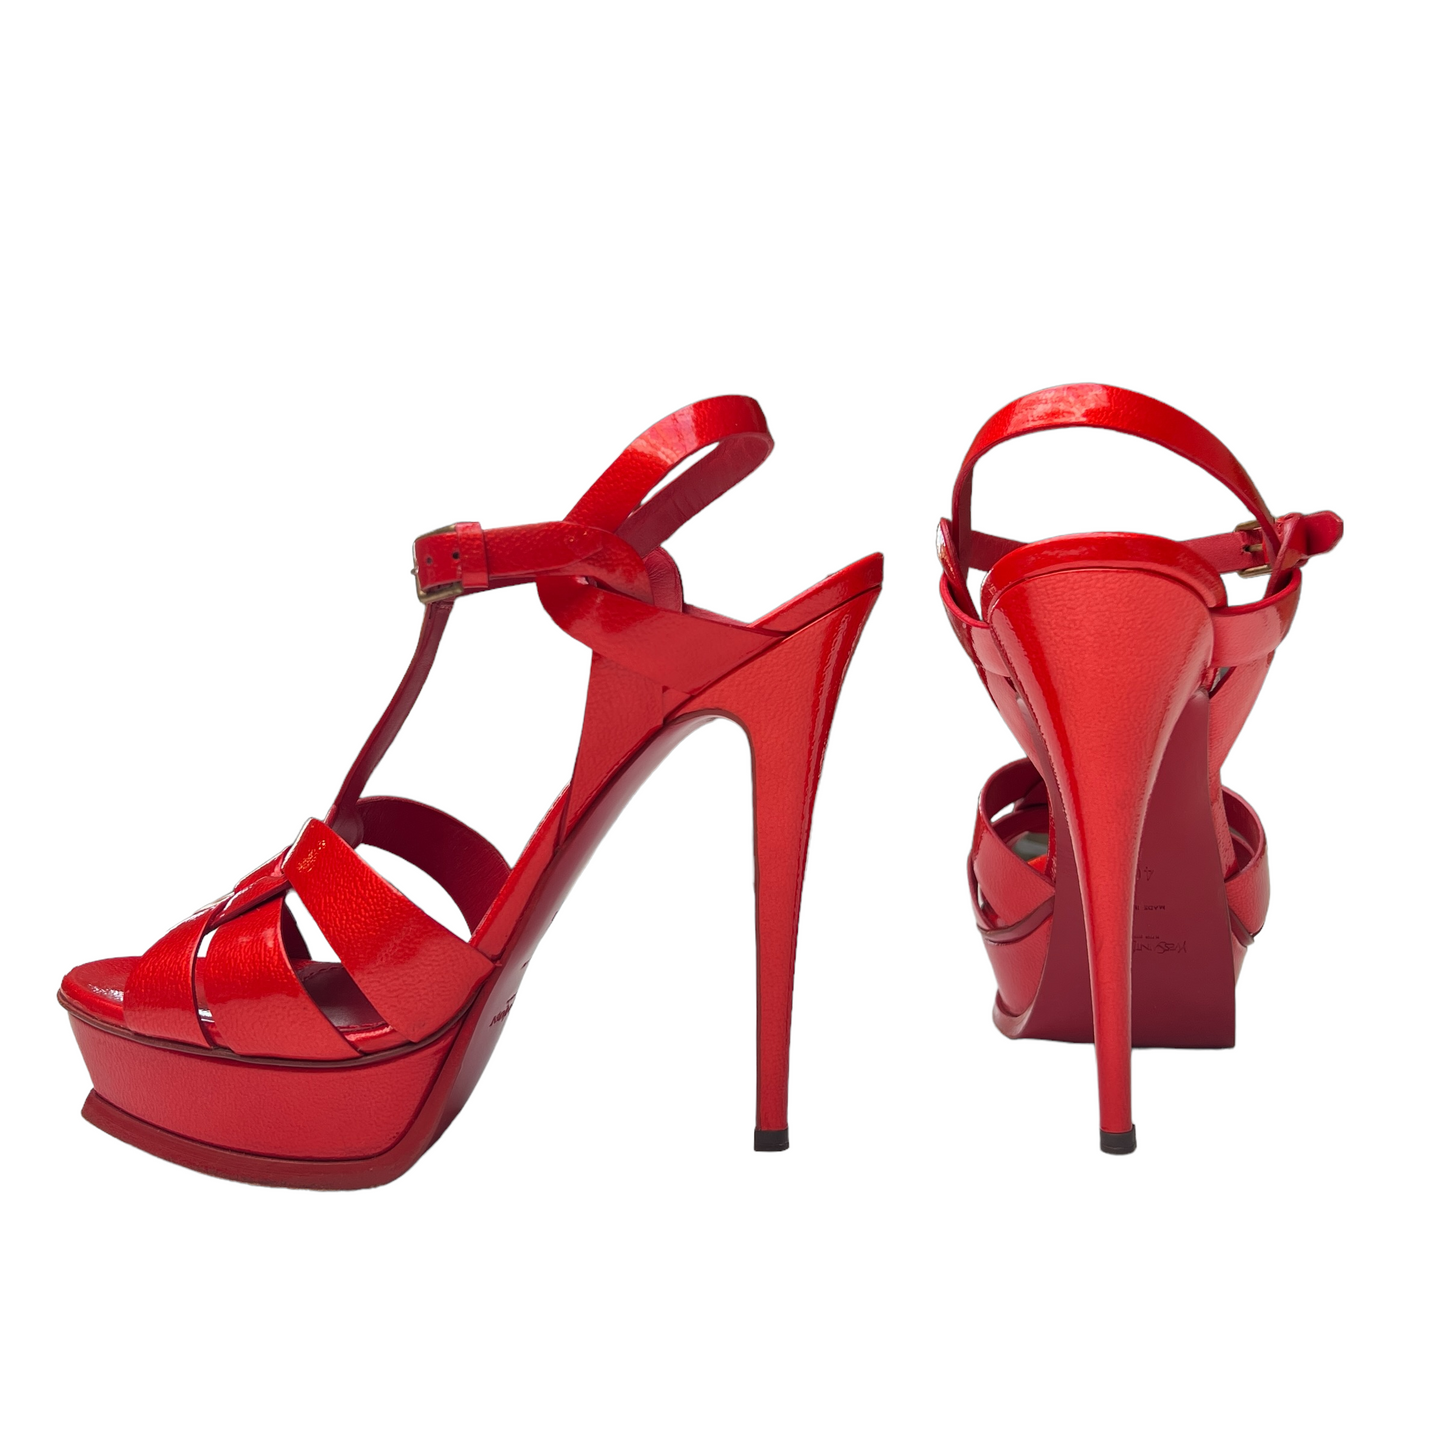 Red Patent Tribute Heels - 10.5